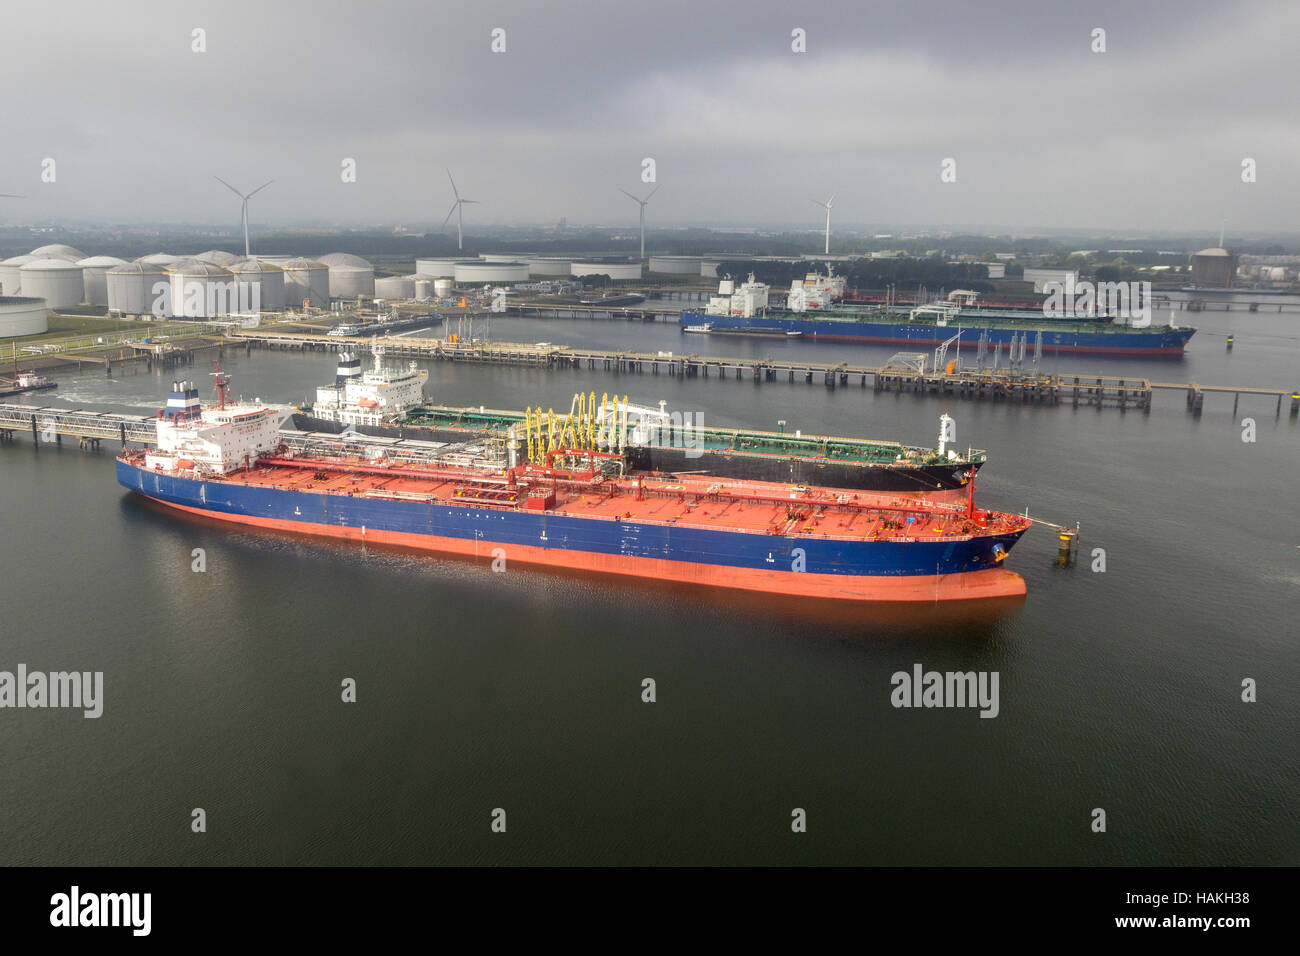 Tanker ships moored in the Port of Rotterdam Stock Photo